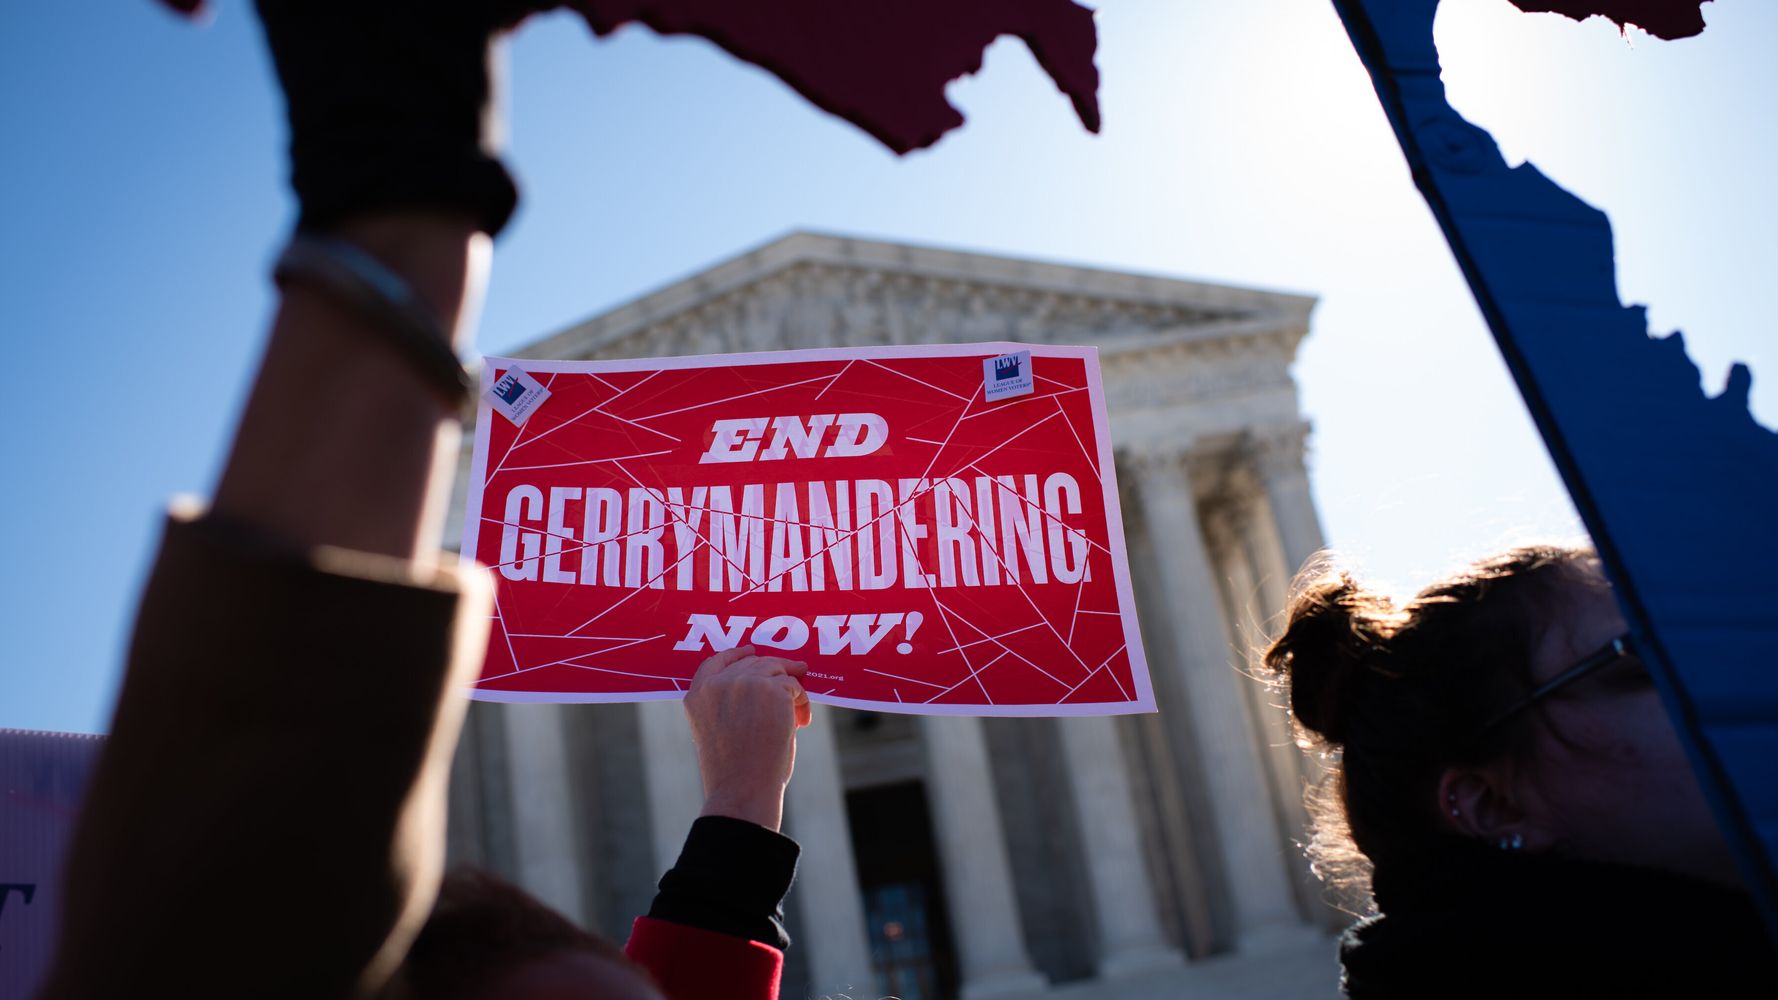 AP: GOP Used Census Data To Gerrymander Districts For Greater Political Advantage